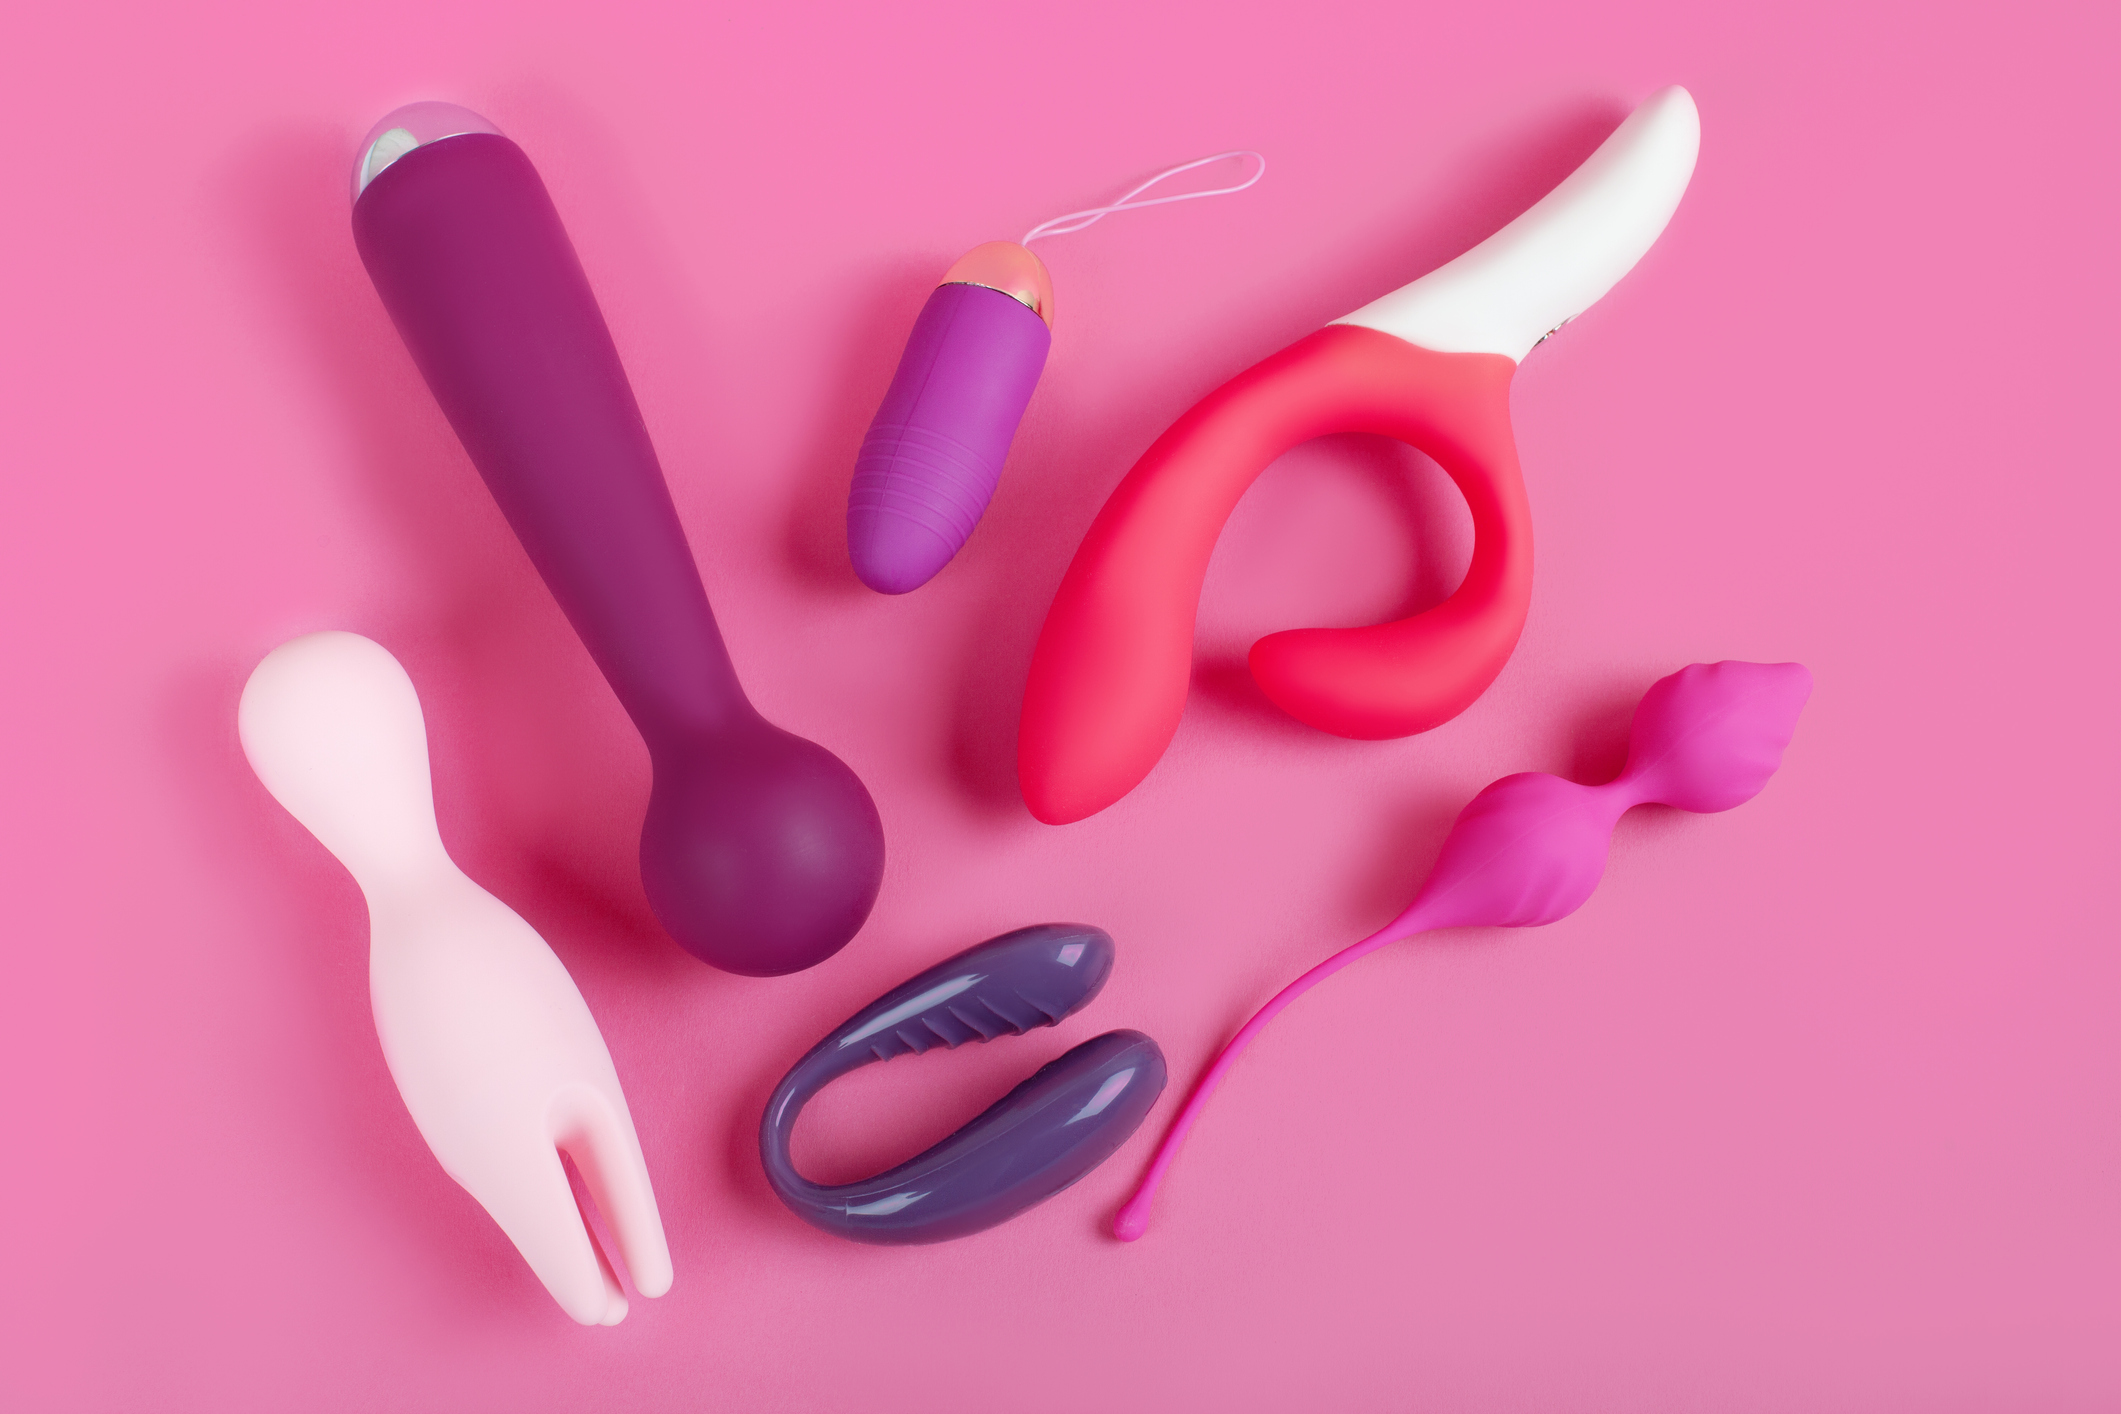 How to clean sex toys the body-safe way Woman and Home image image